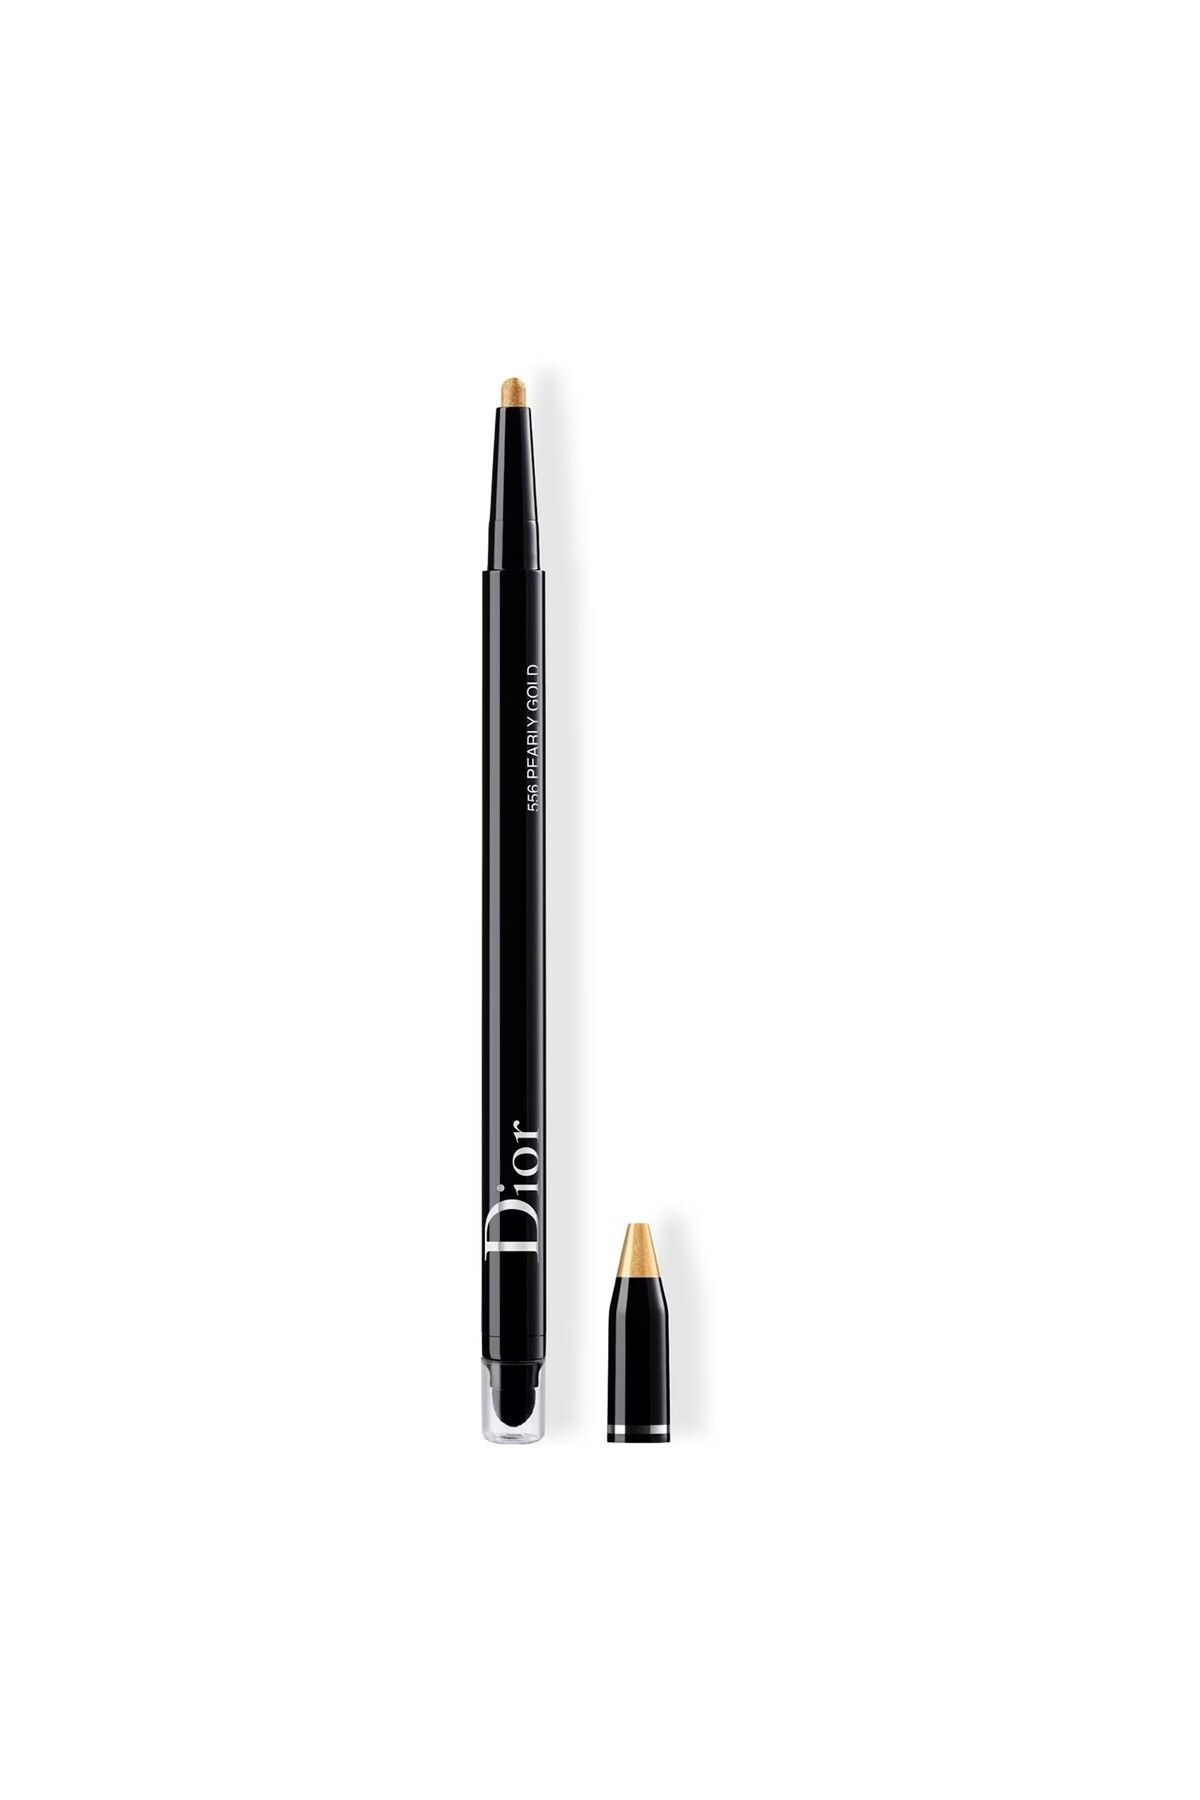 Dior 24H*STYLO WATERPROOF -WEAR-LASTİNG PROTECTİON FOR UP TO 24 HOURS, MATTE EYELİNER PSSN1969